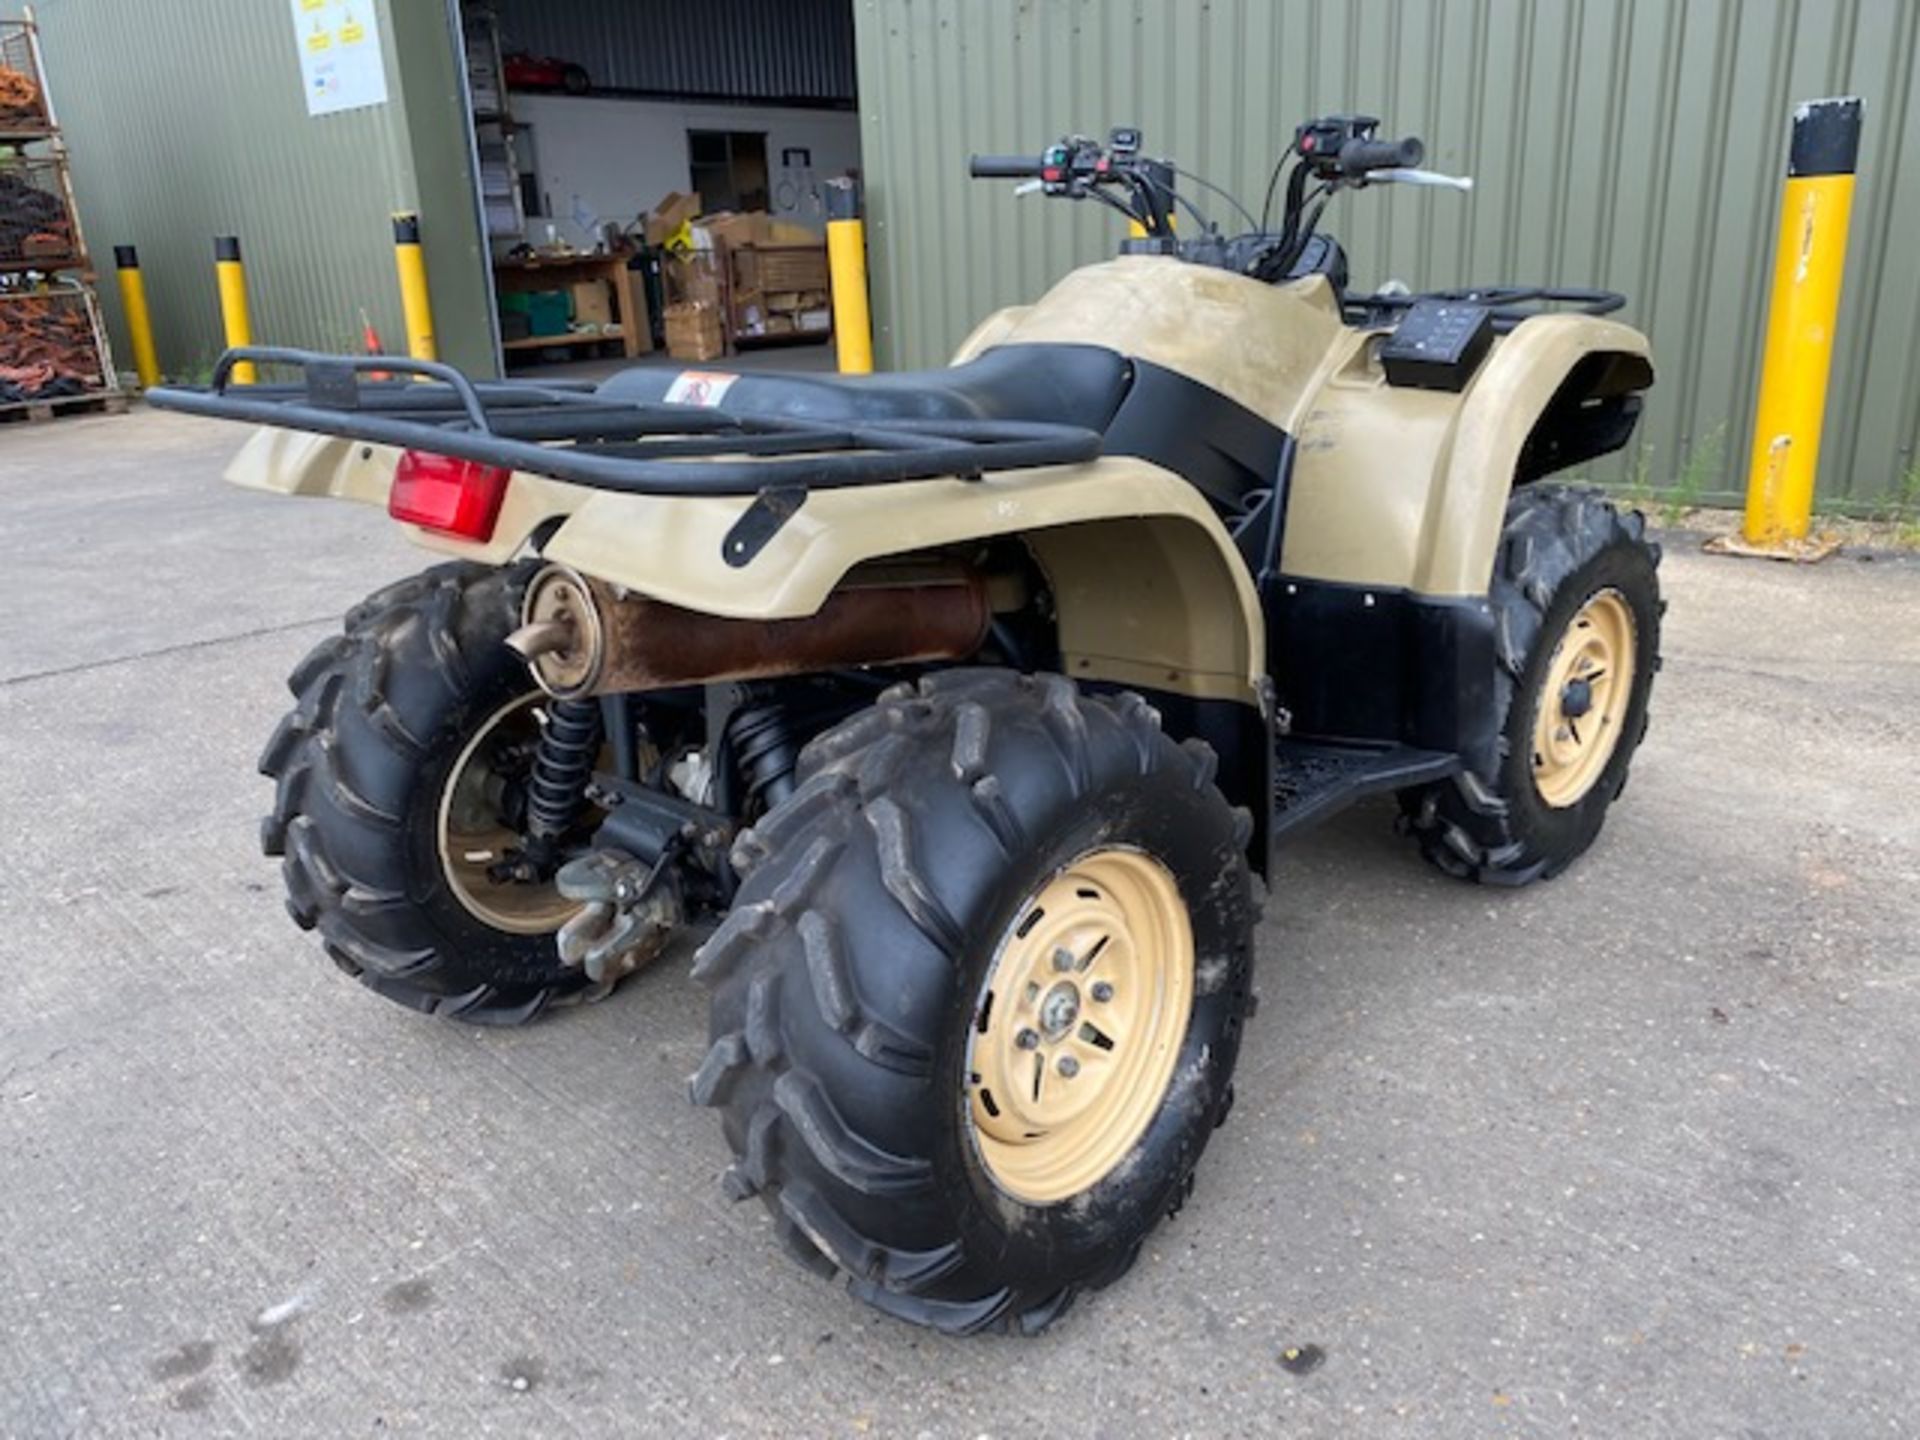 Military Specification Yamaha Grizzly 450 4 x 4 ATV Quad Bike ONLY 5,539Km!!! - Image 9 of 26